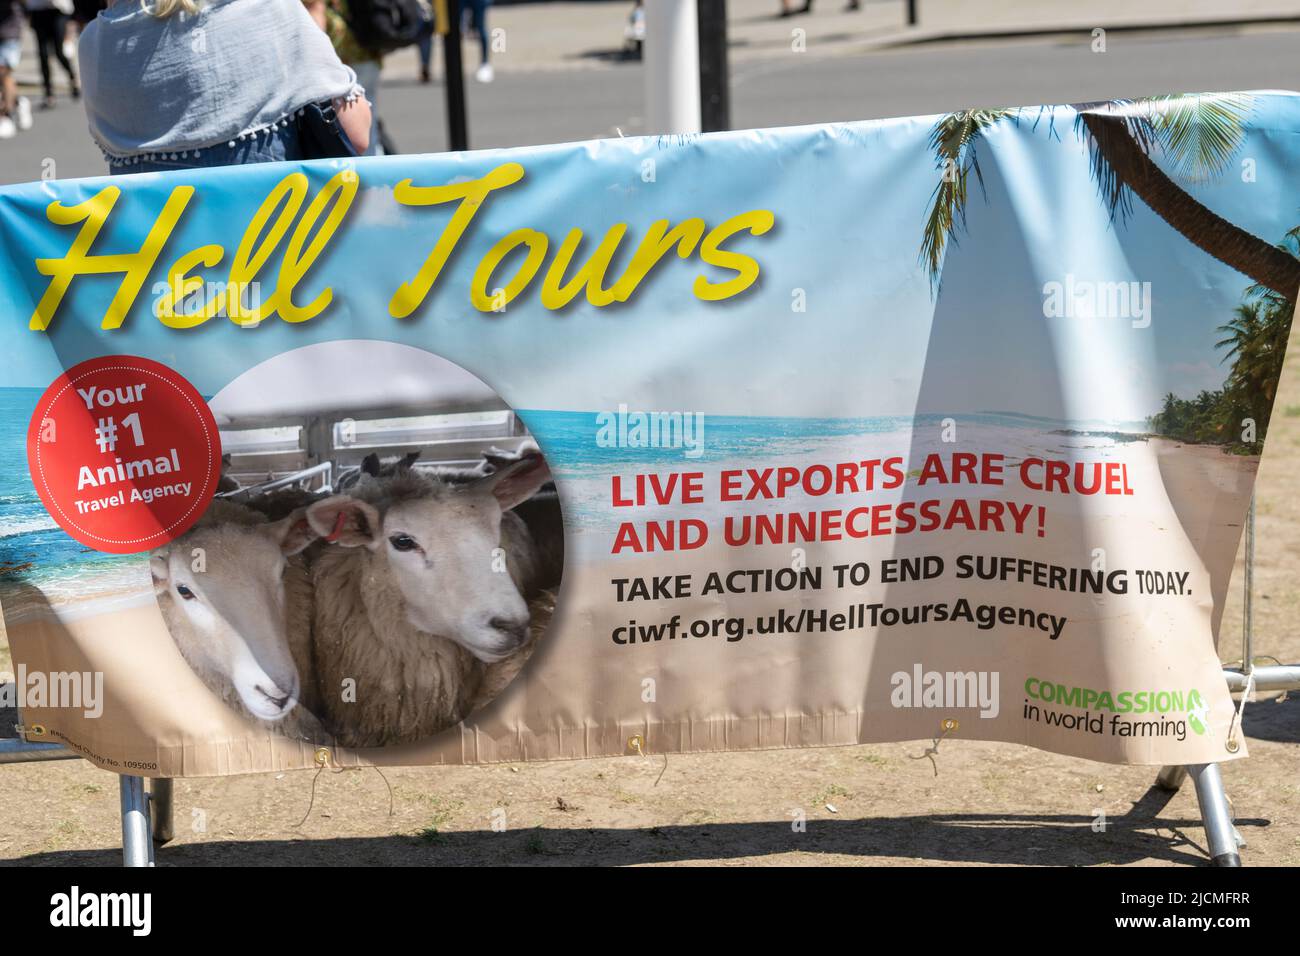 London, UK. 14th June, 2022. Compassion in Farming protest against live animal exports in Parliament Square London UK, Credit: Ian Davidson/Alamy Live News Stock Photo